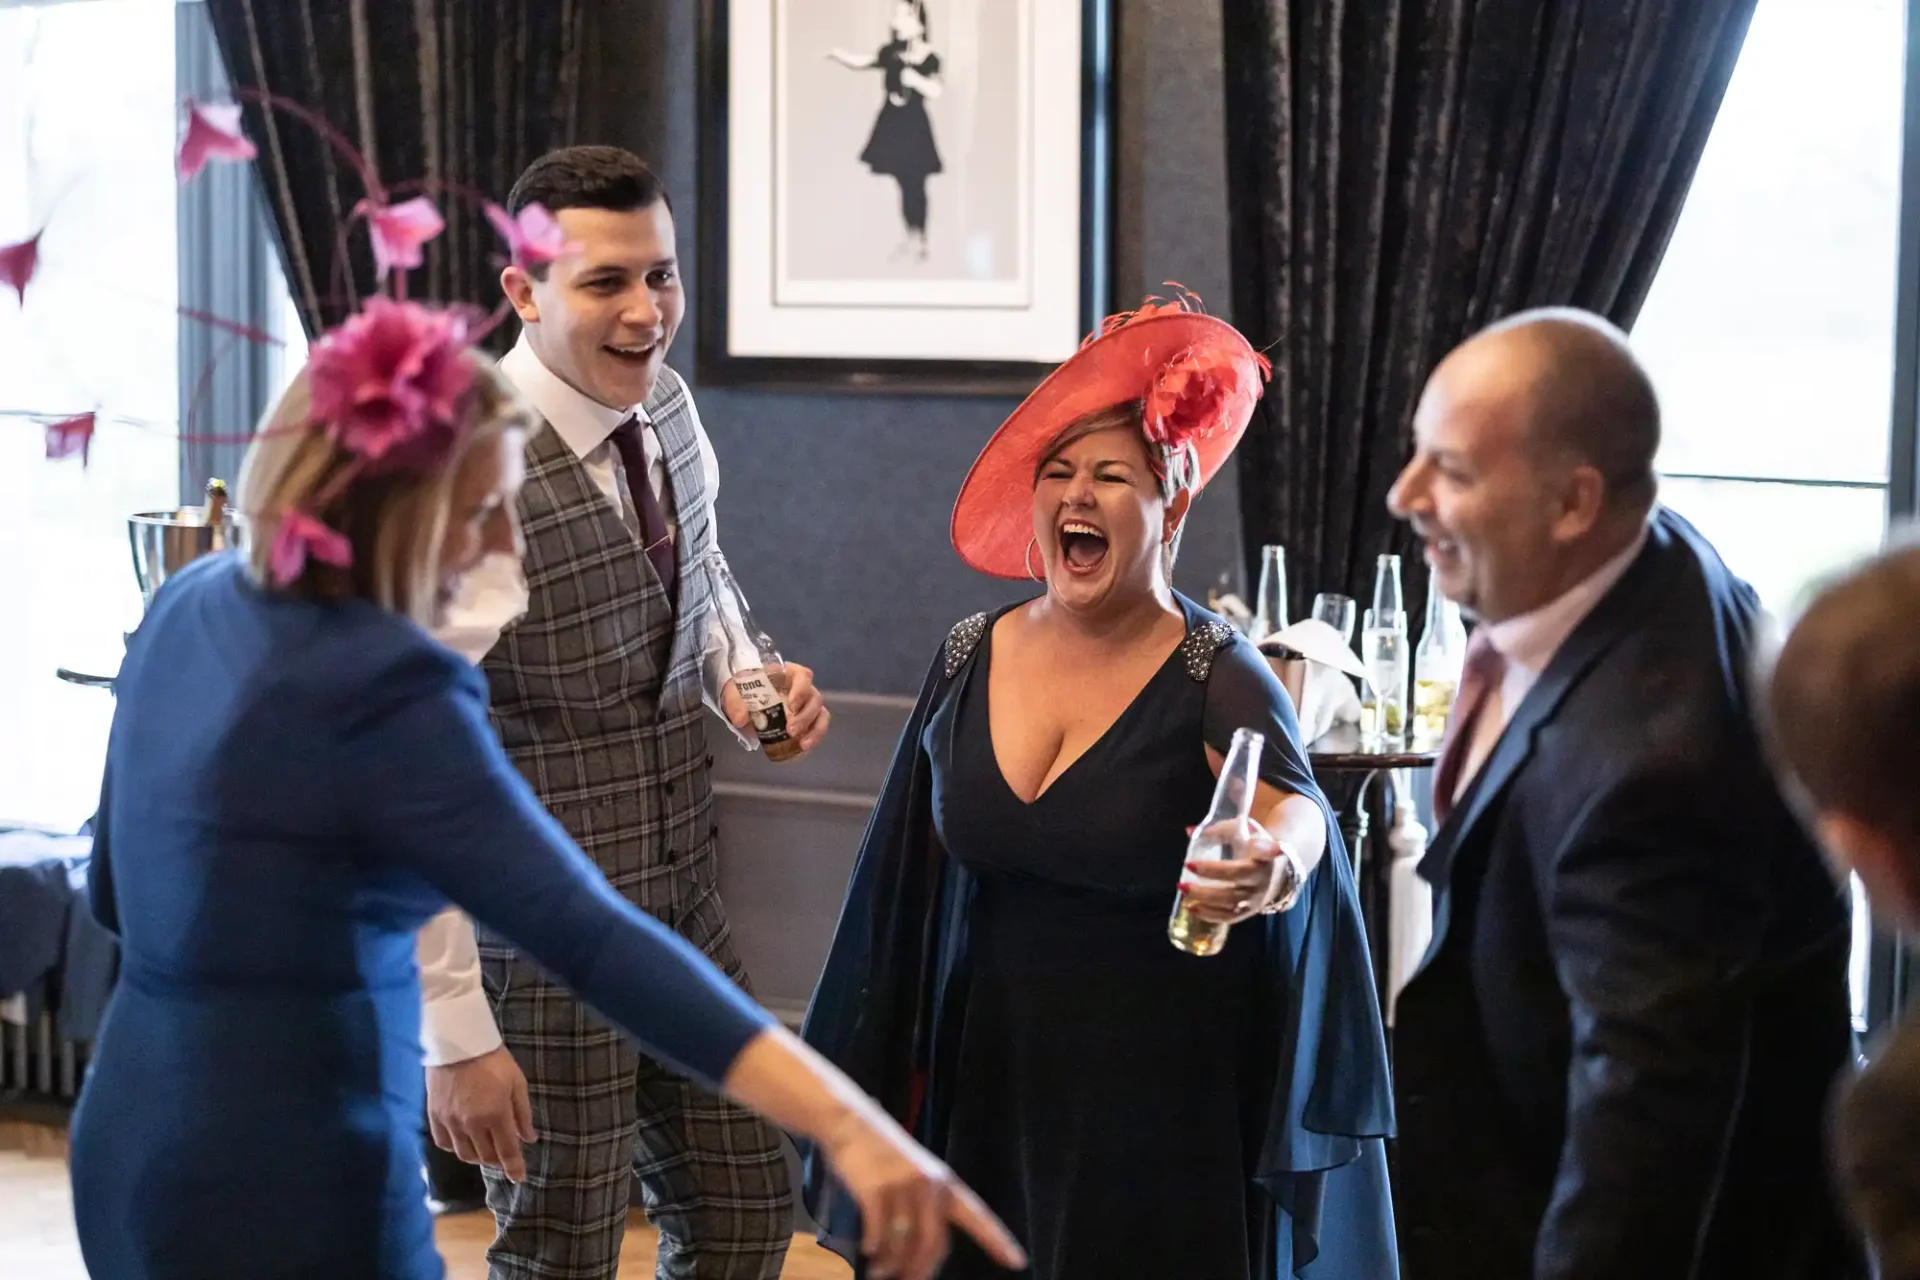 A woman in a red hat laughing joyously at a social gathering while holding a drink, surrounded by three other adults in a decorated room.